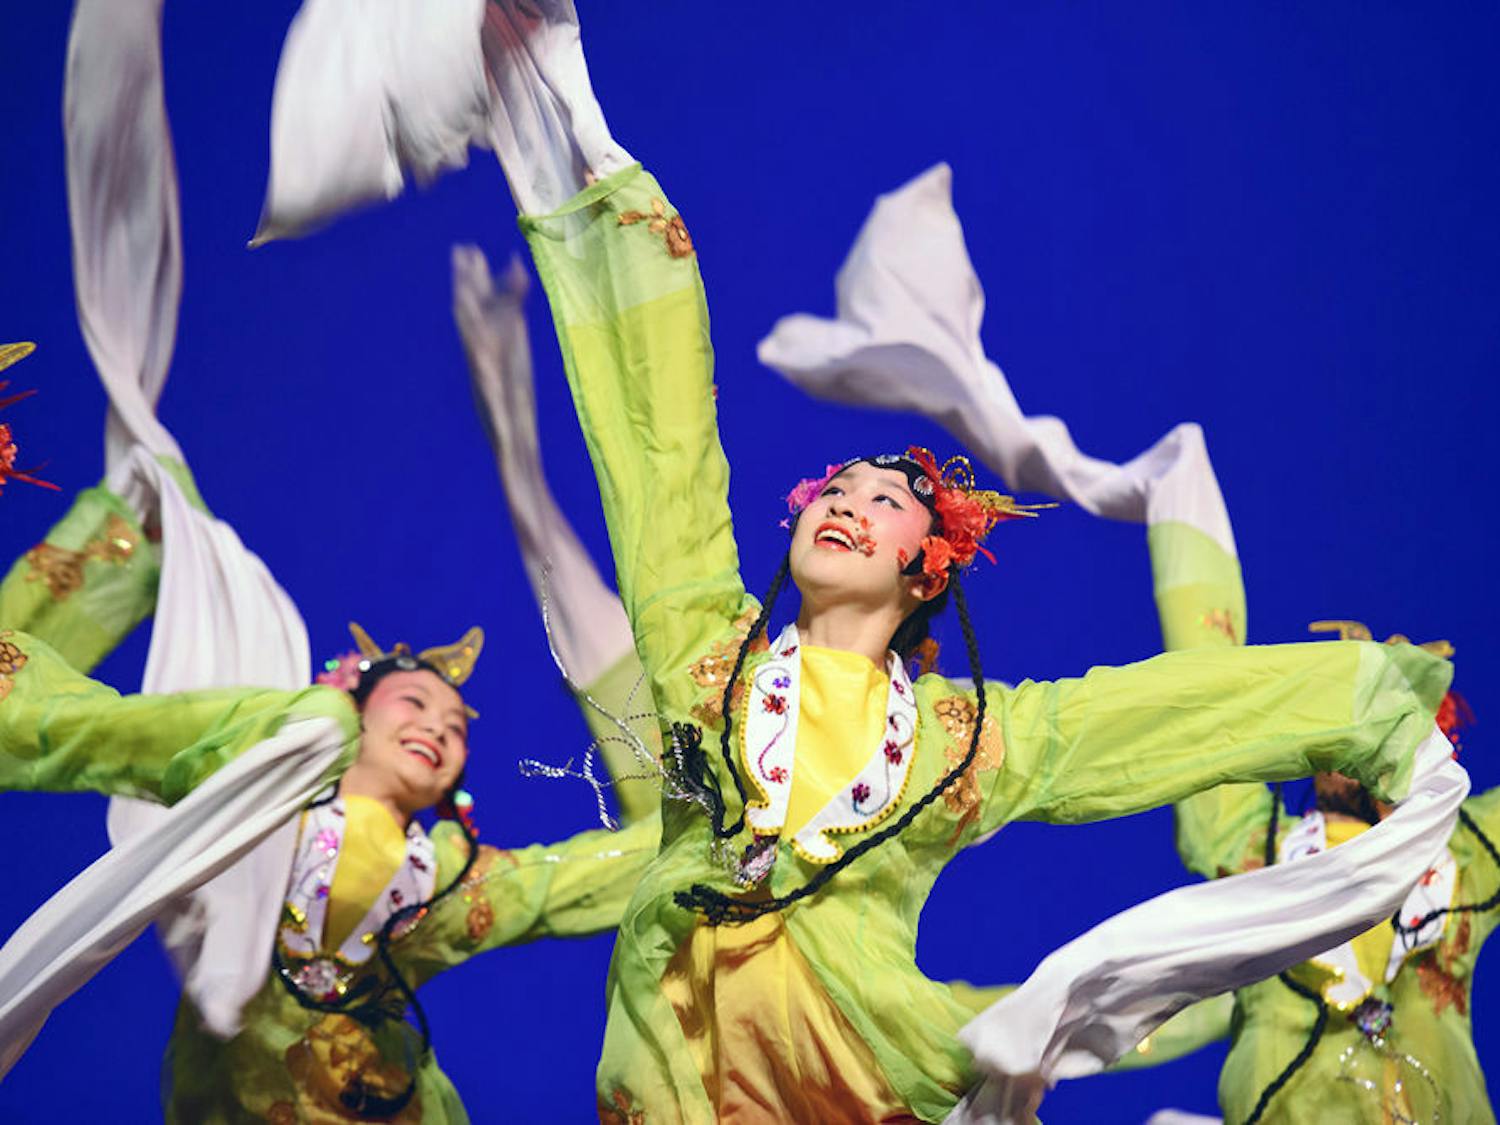 Students from the Hua-Gen Chinese School in Gainesville perform on Saturday night in the Phillips Center for the Performing Arts. Over 950 people attended the annual Chinese New Year gala organized by the Chinese Student Association at UF.